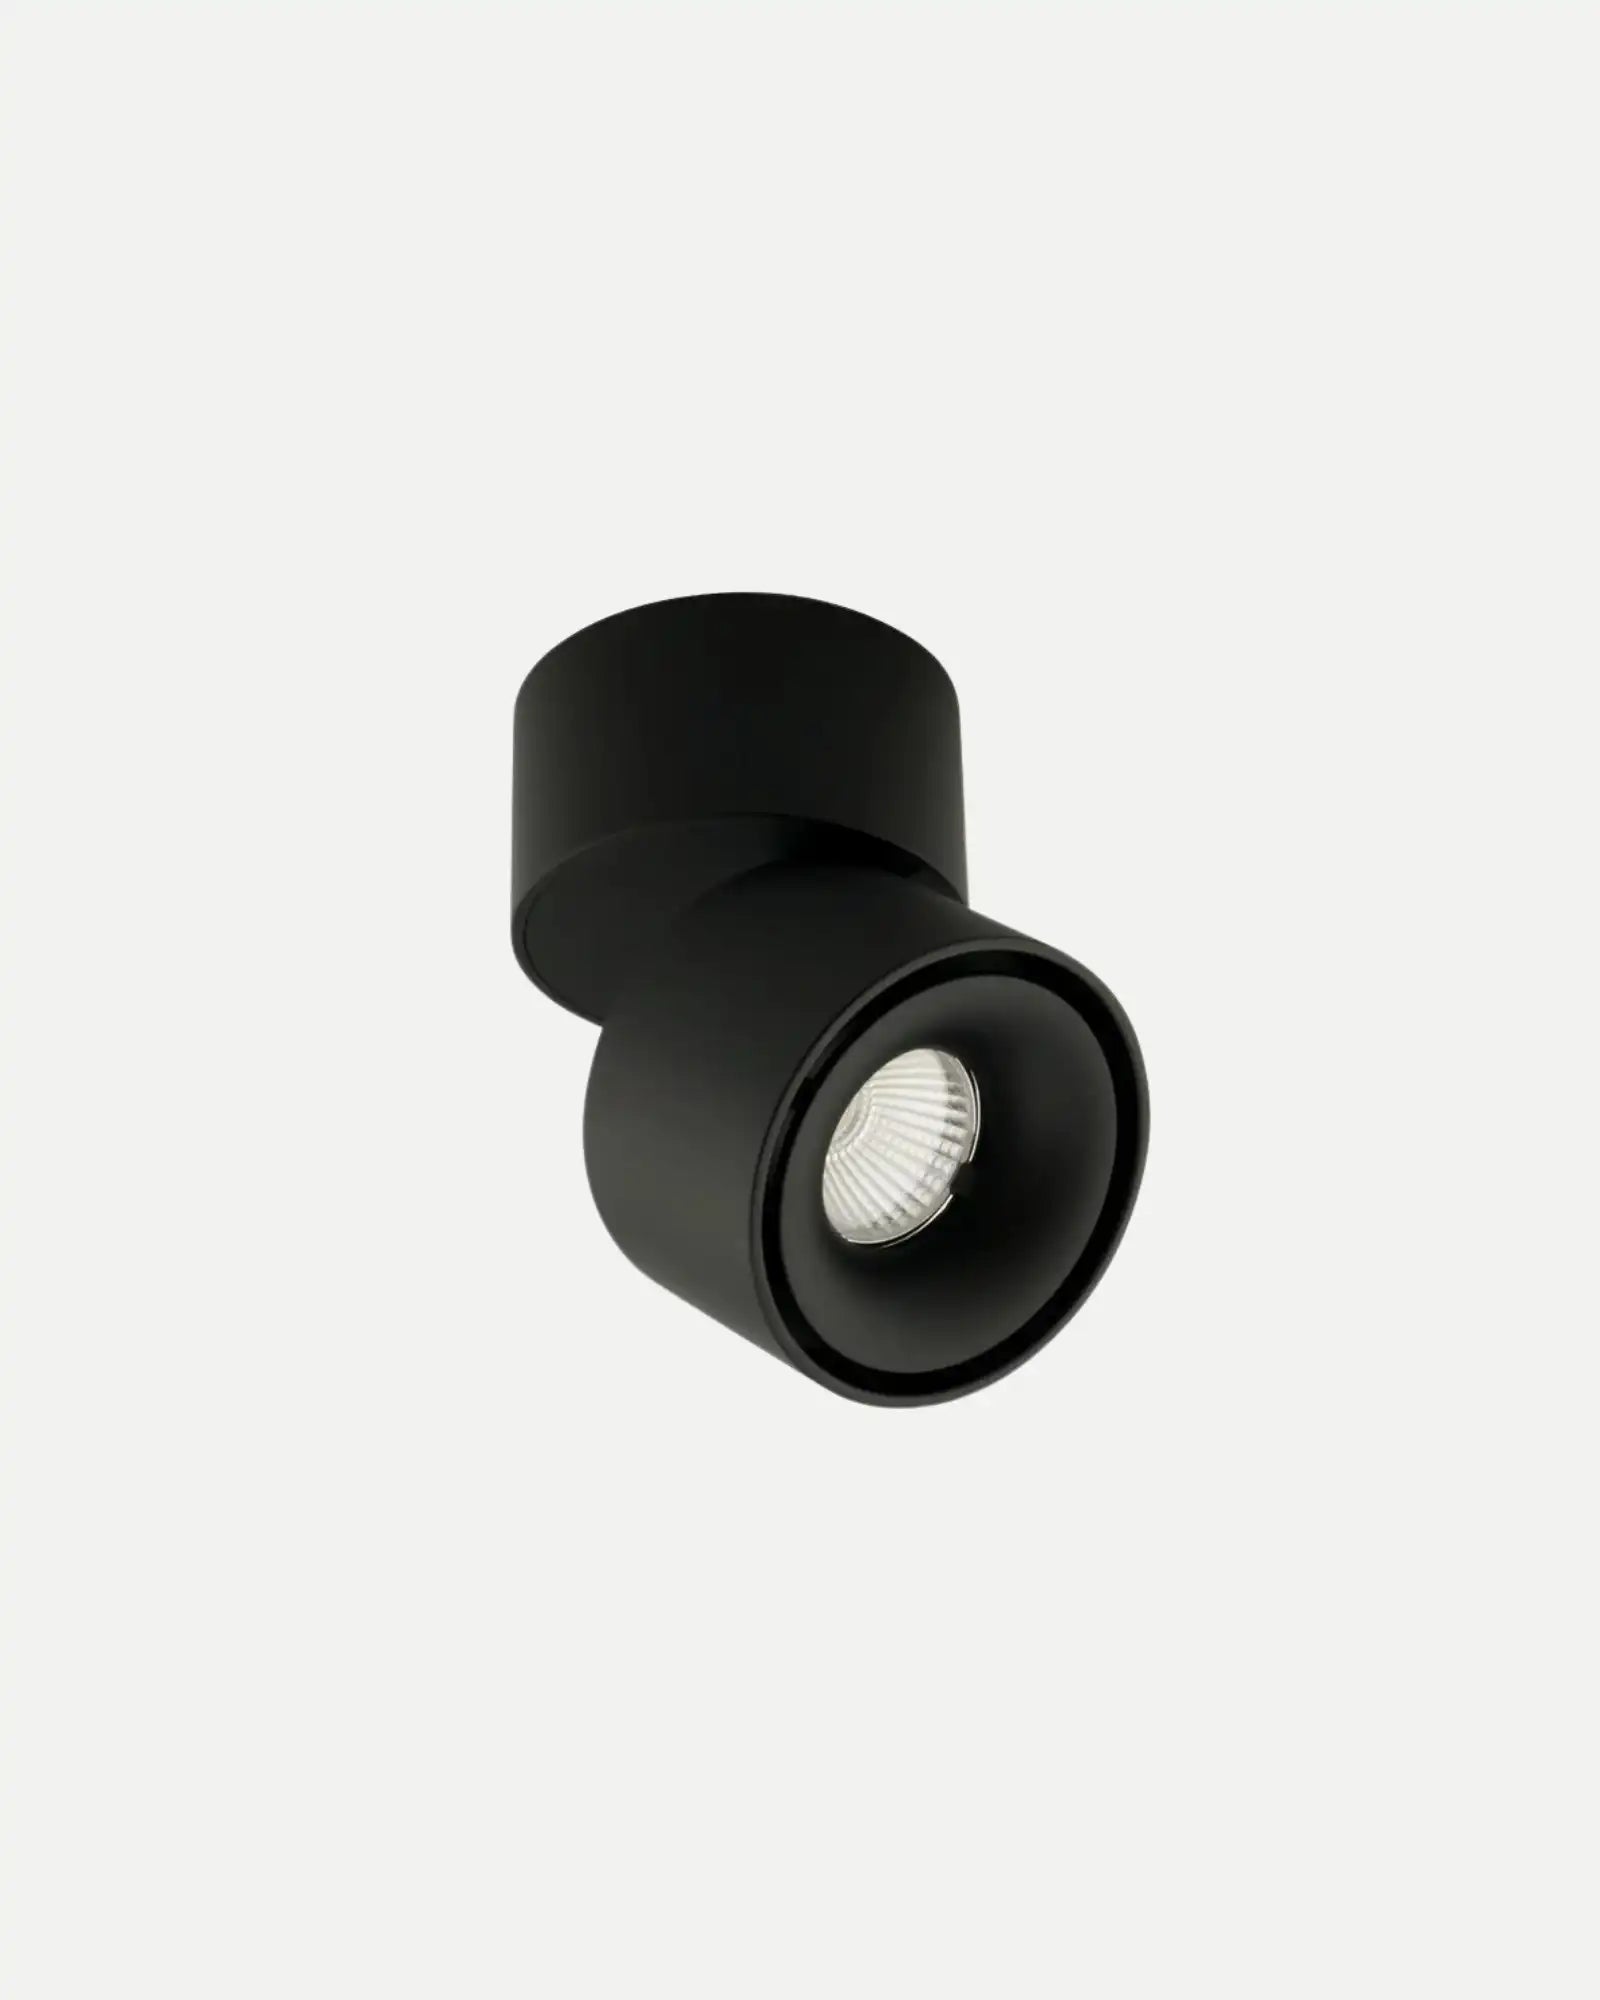 Tommy Mini Spot Ceiling Light by Studio Italia | Nook Collections